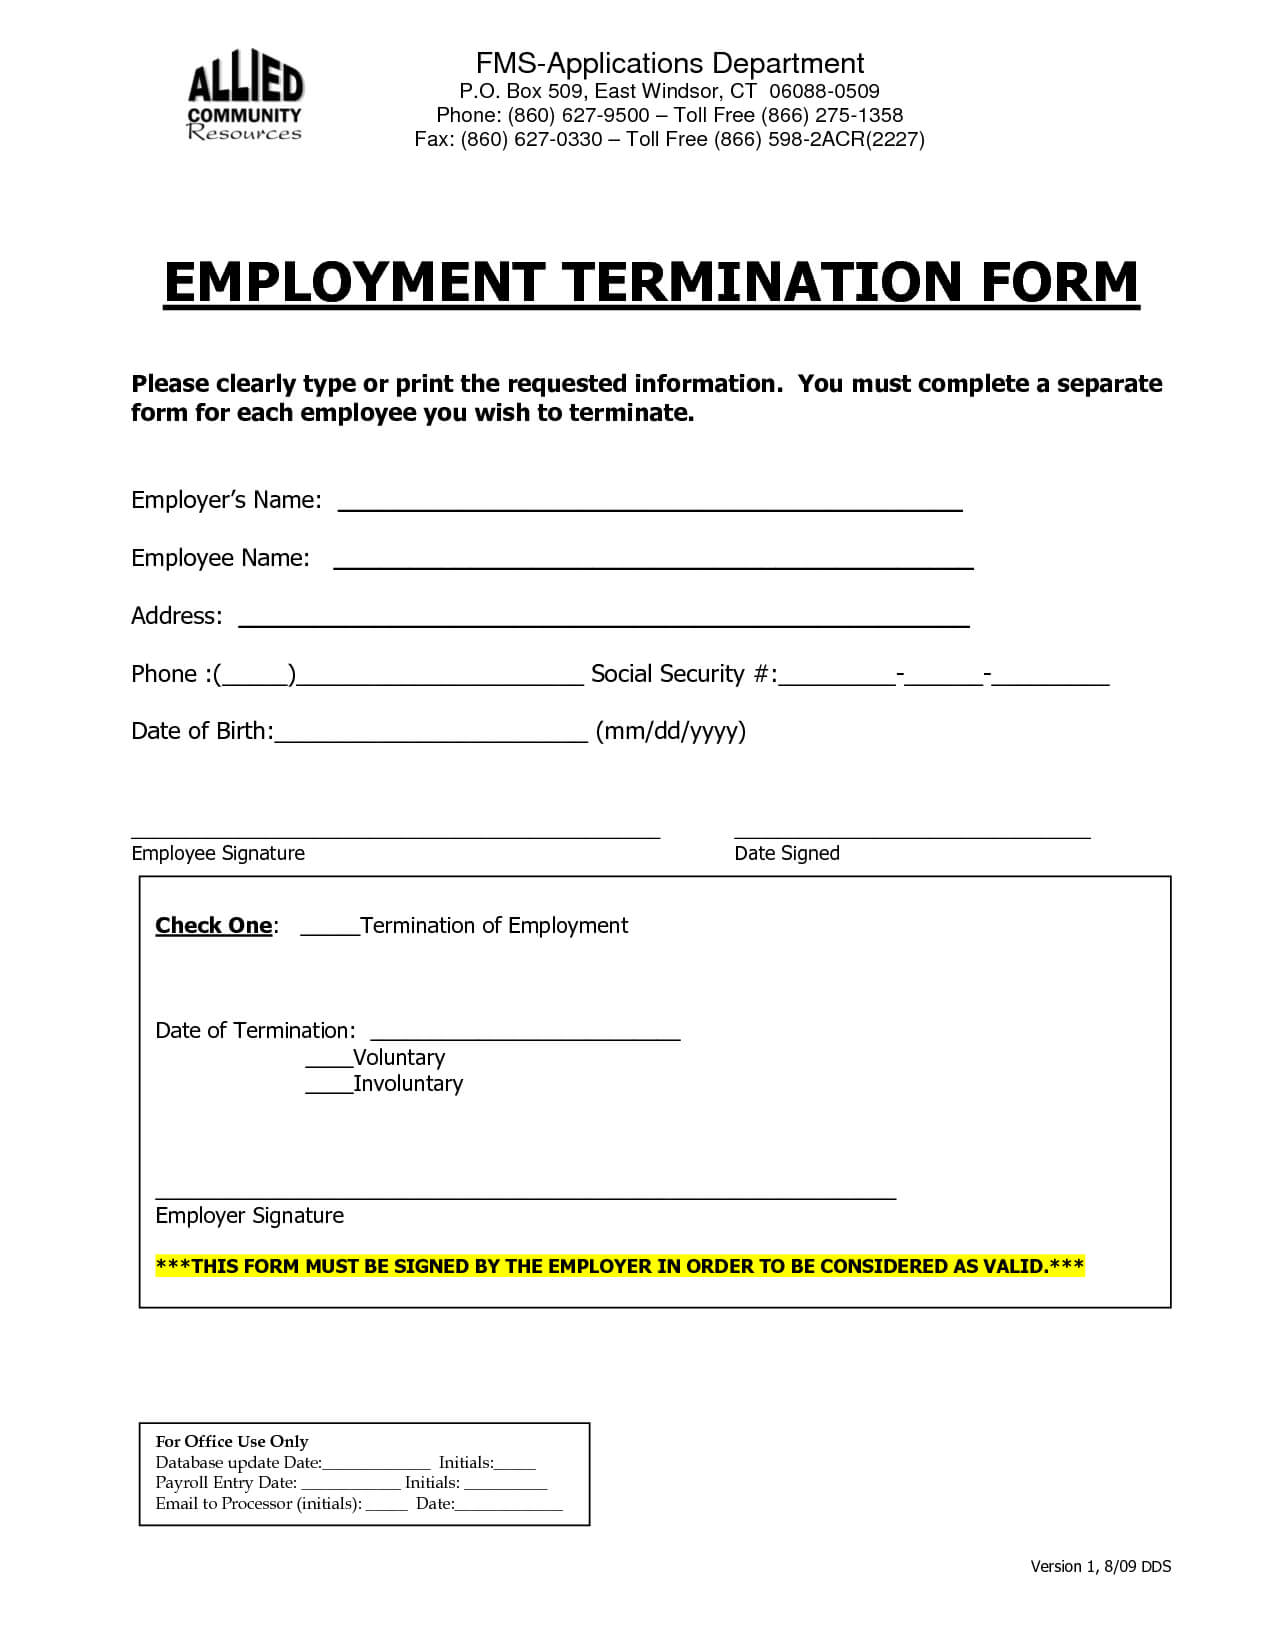 Termination Form Template Employee Termination Letter For ...